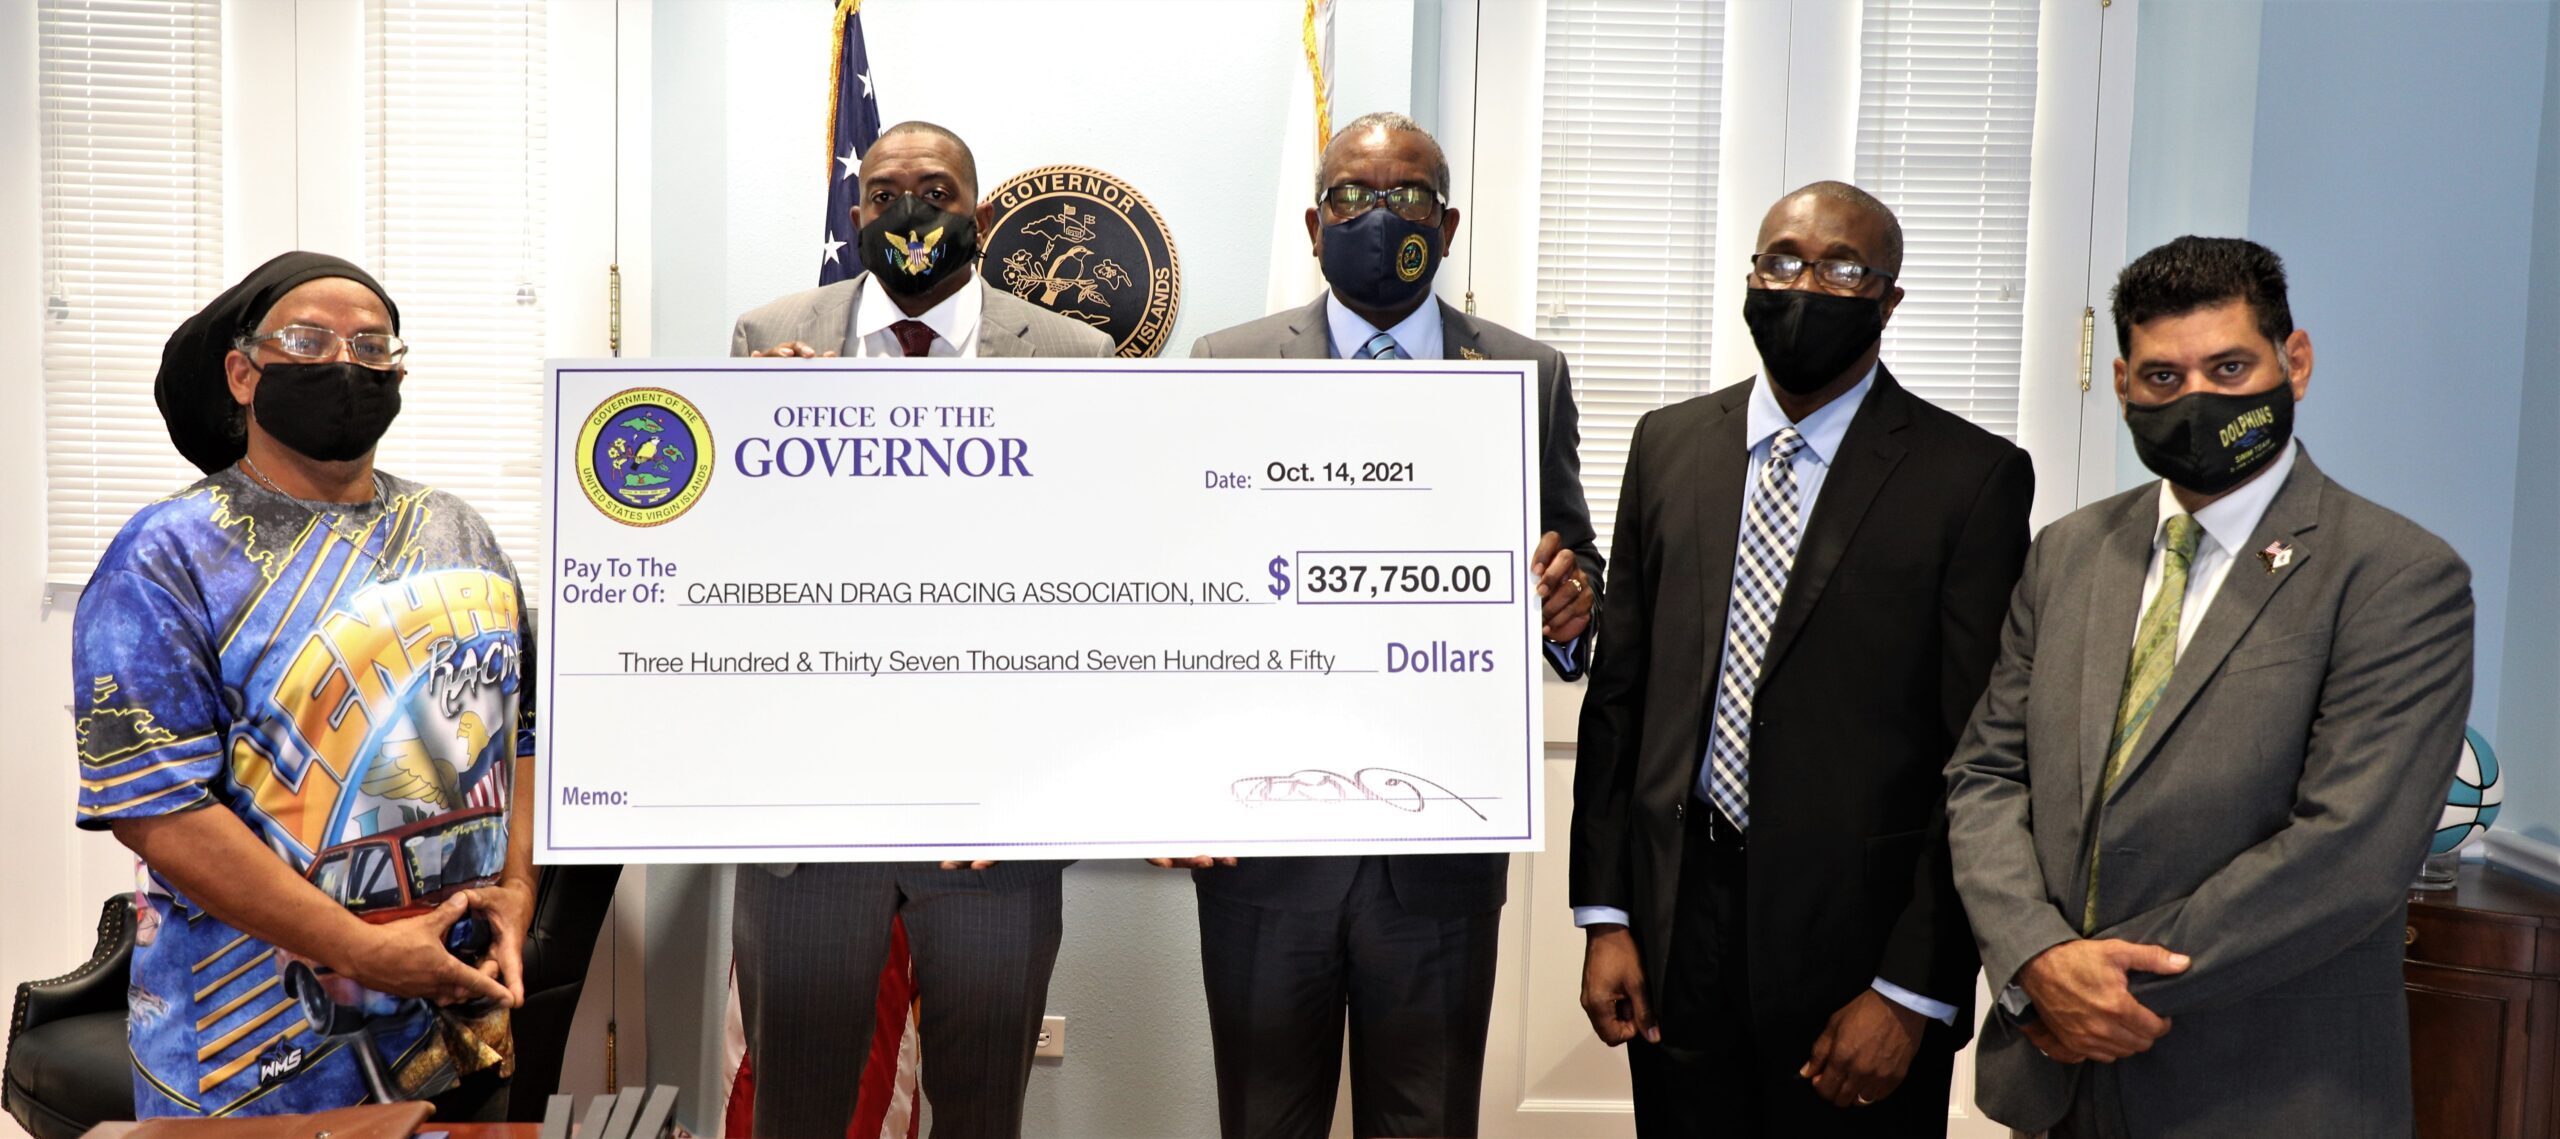 Bryan Presents Drag Racing Association With $337K to Complete St. Croix Track